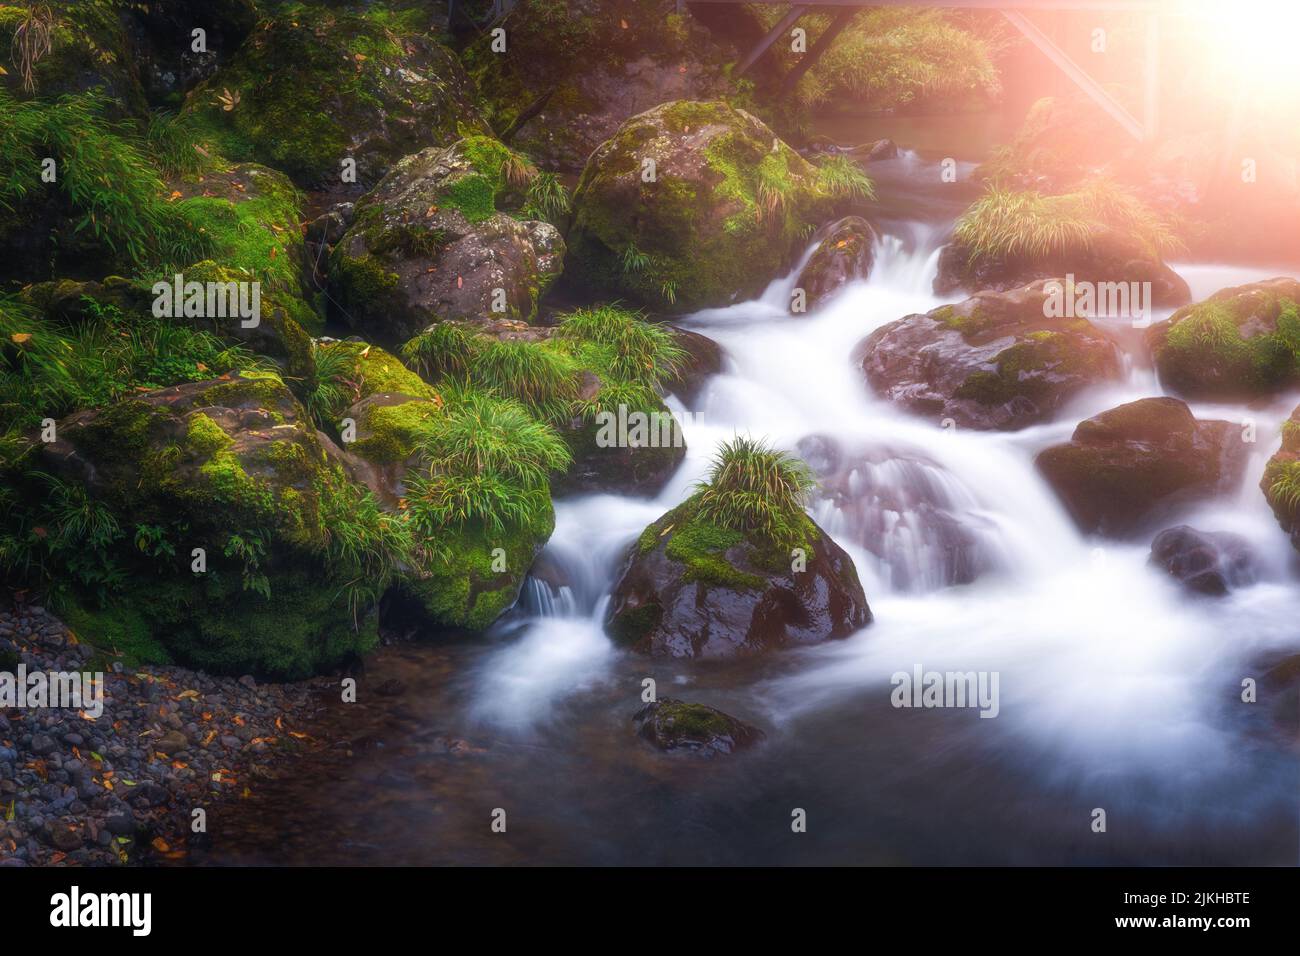 Water Flowing By Moss Covered Rocks In A Stream - PacificStock